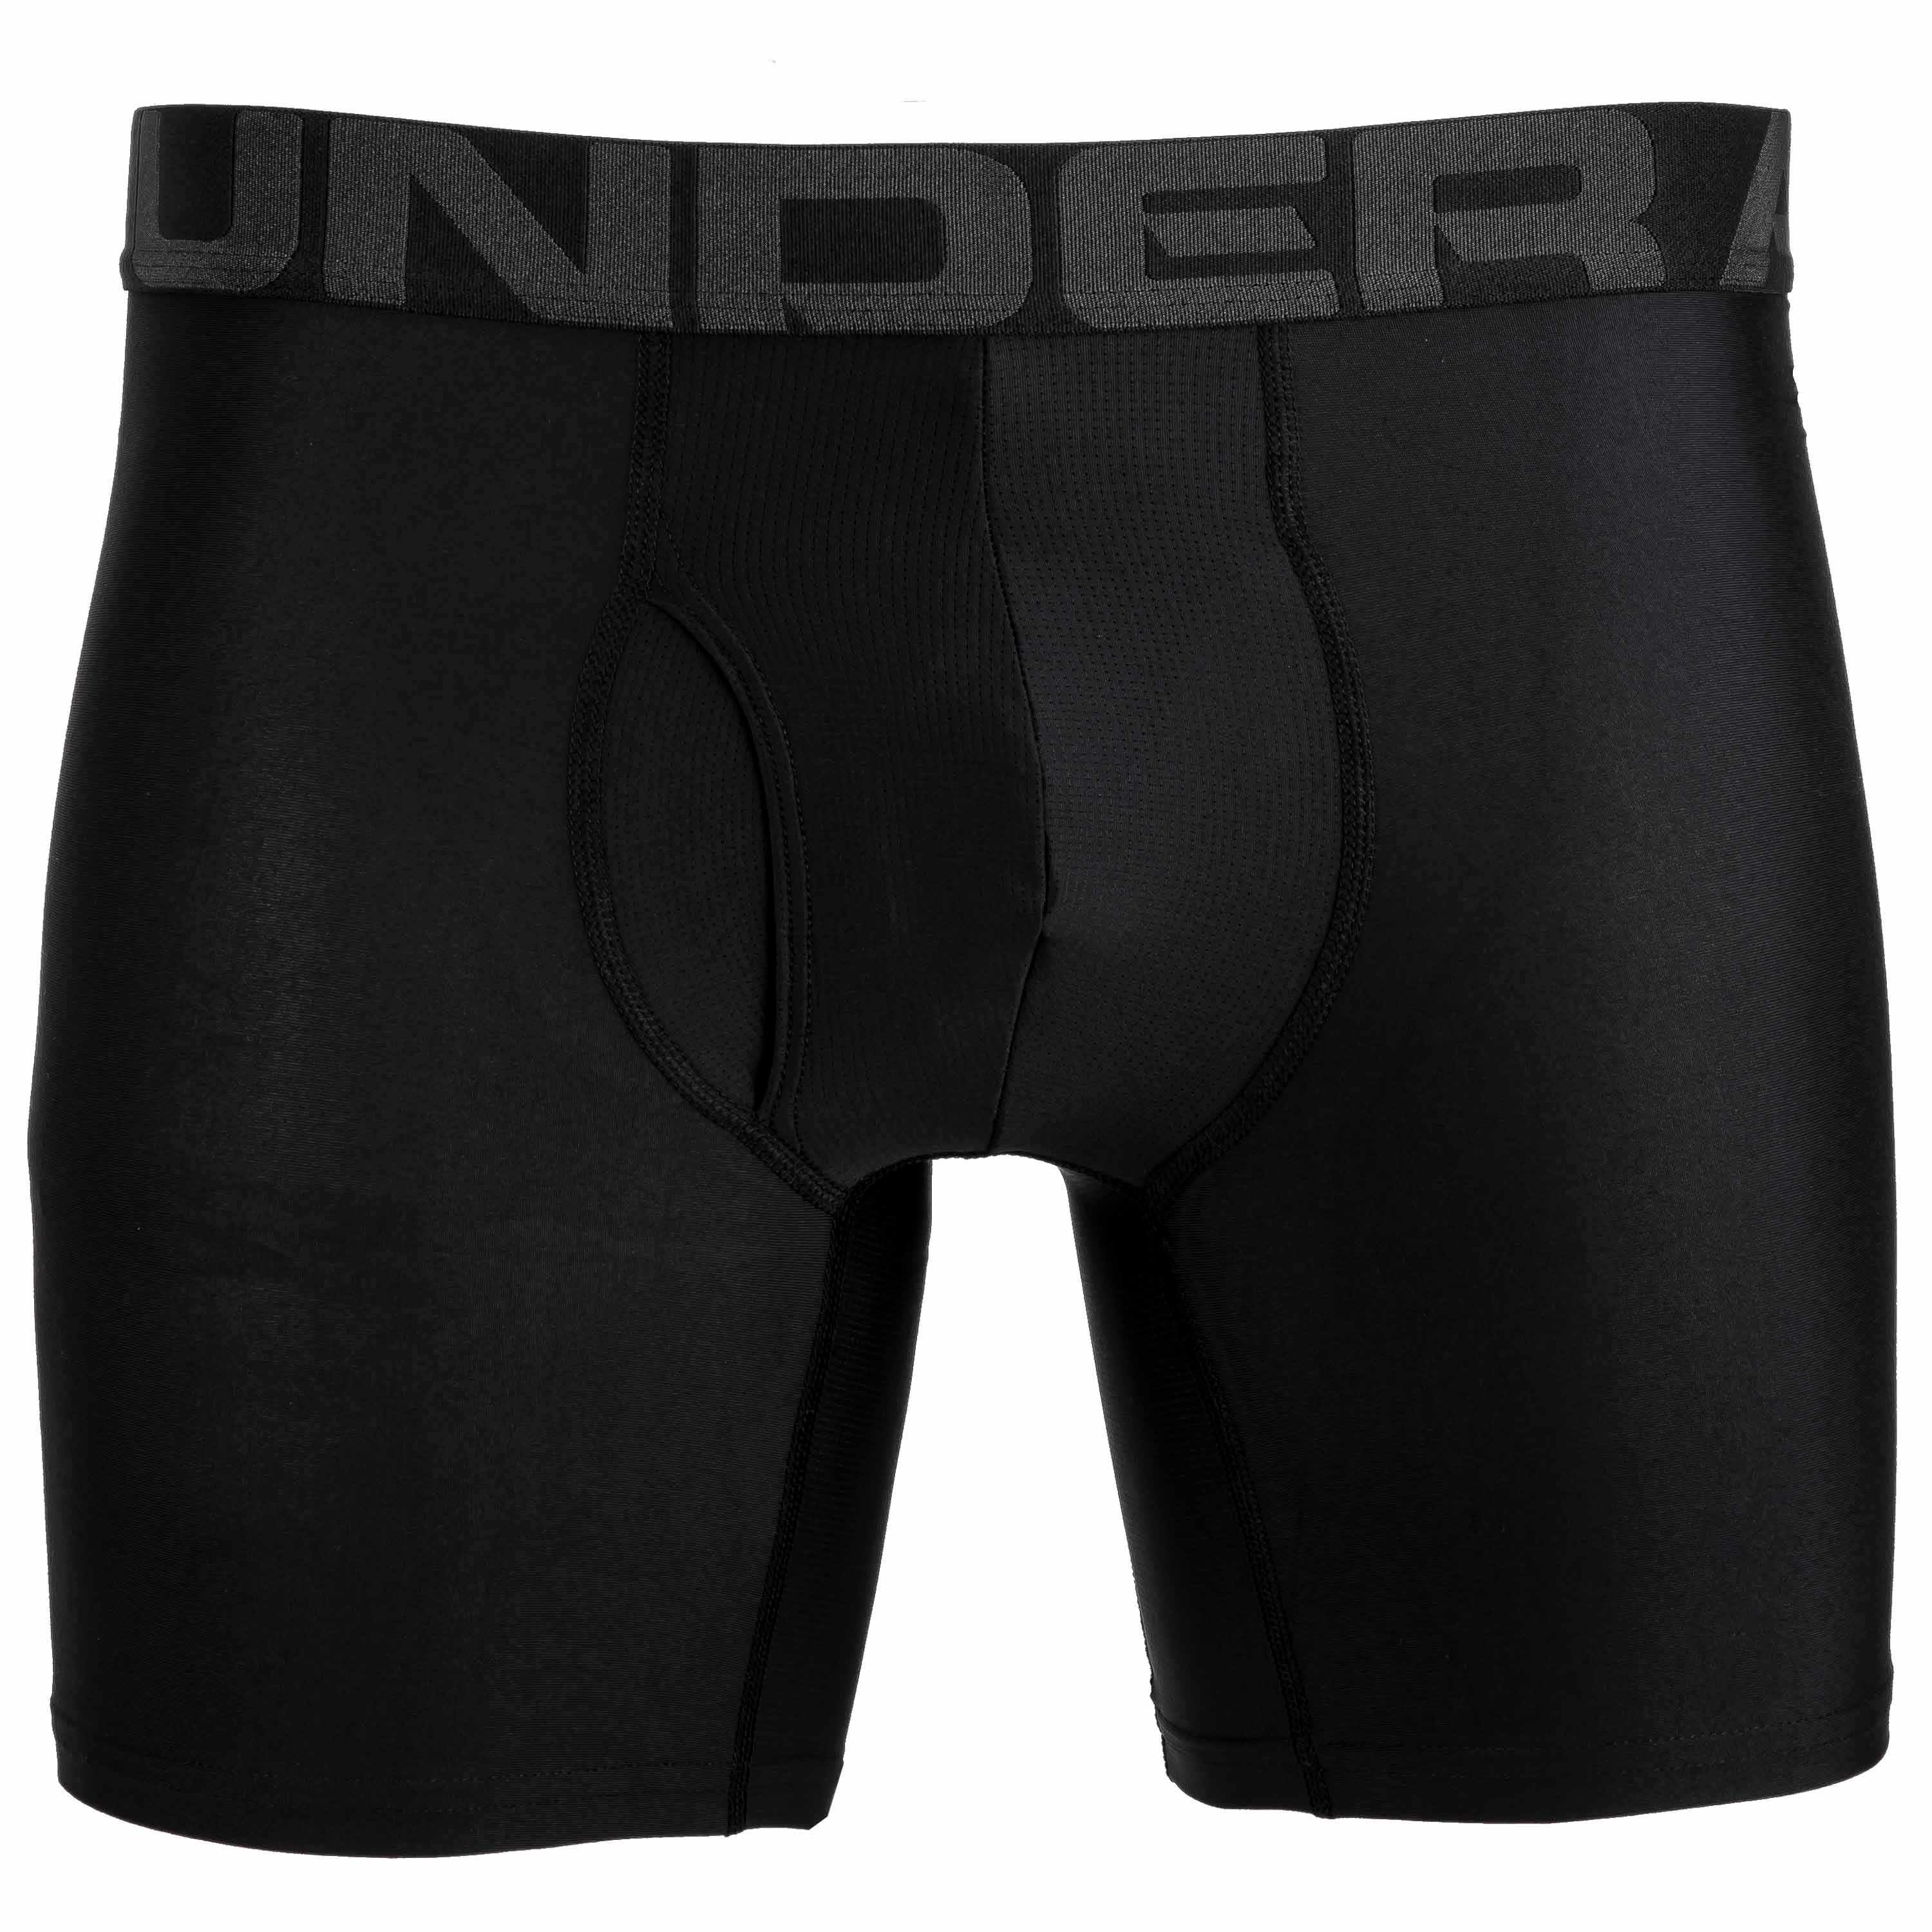 Purchase the Under Armour Boxer Short Tech 6 Inch 2-Pack black b